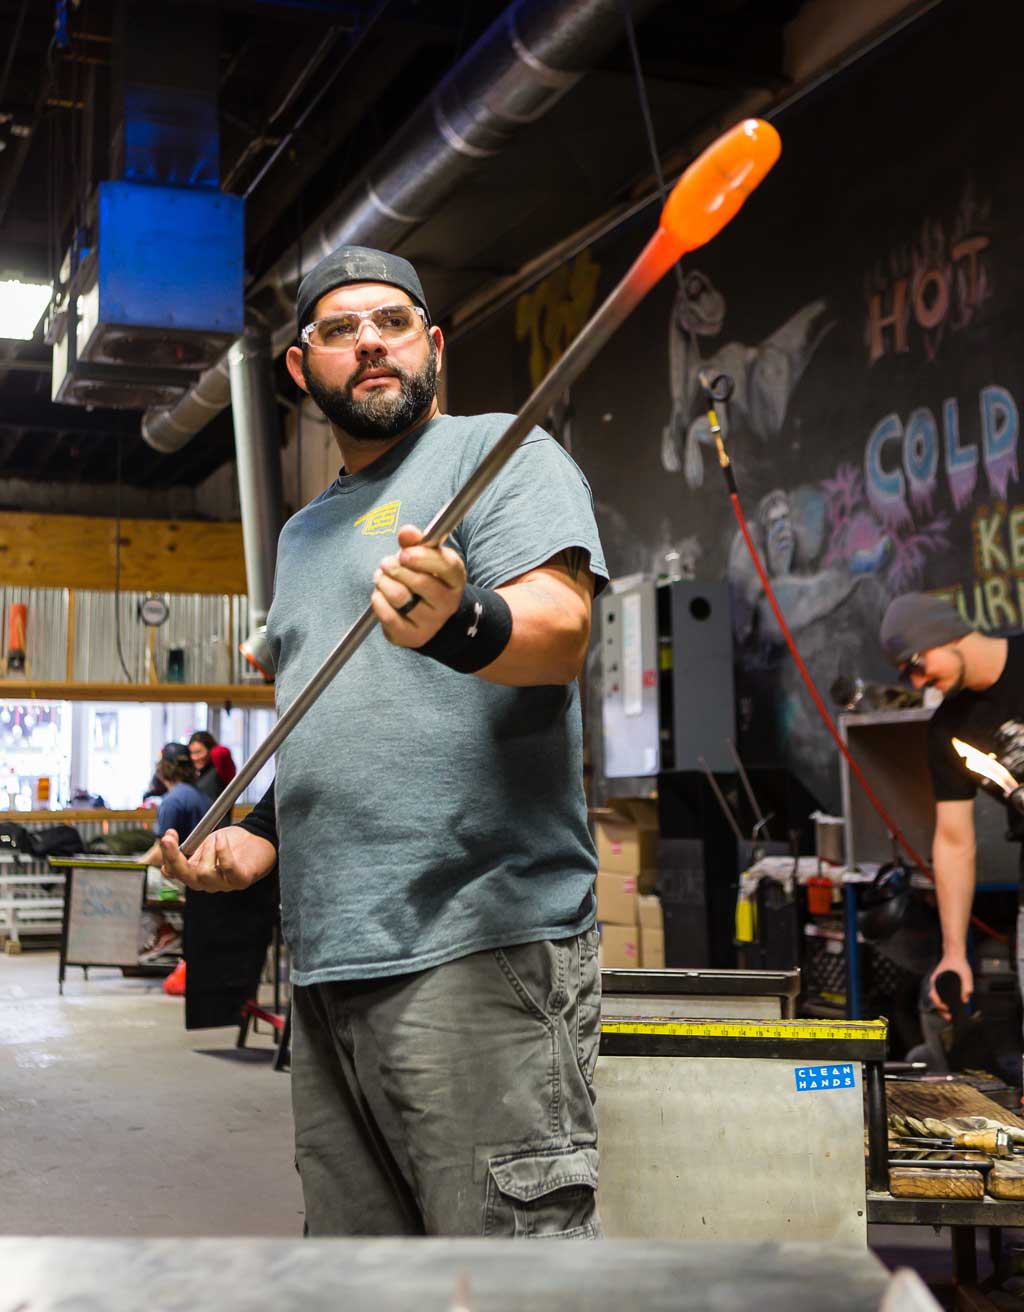 Kenneth Gonzalez learned glassblowing in college and now works to teach the art to students in Tulsa. Photo by Chris Humphrey Photographer.